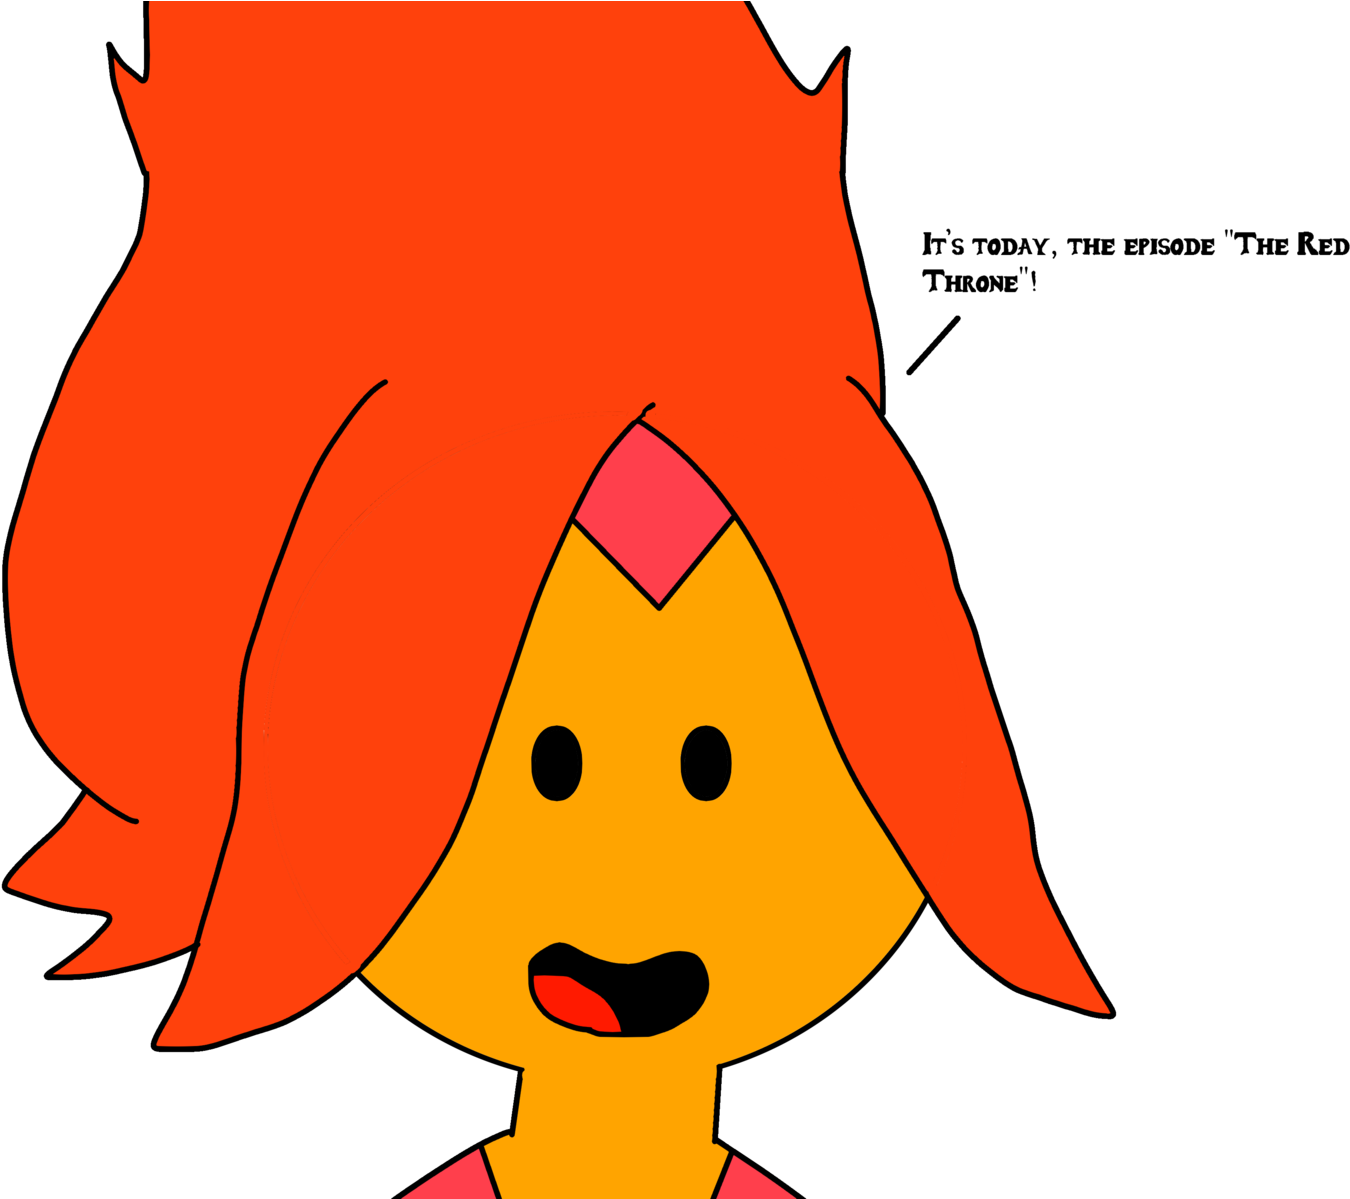 Flame Princess Talks About Red Throne By Marcospower1996 - Cartoon (1600x1198)